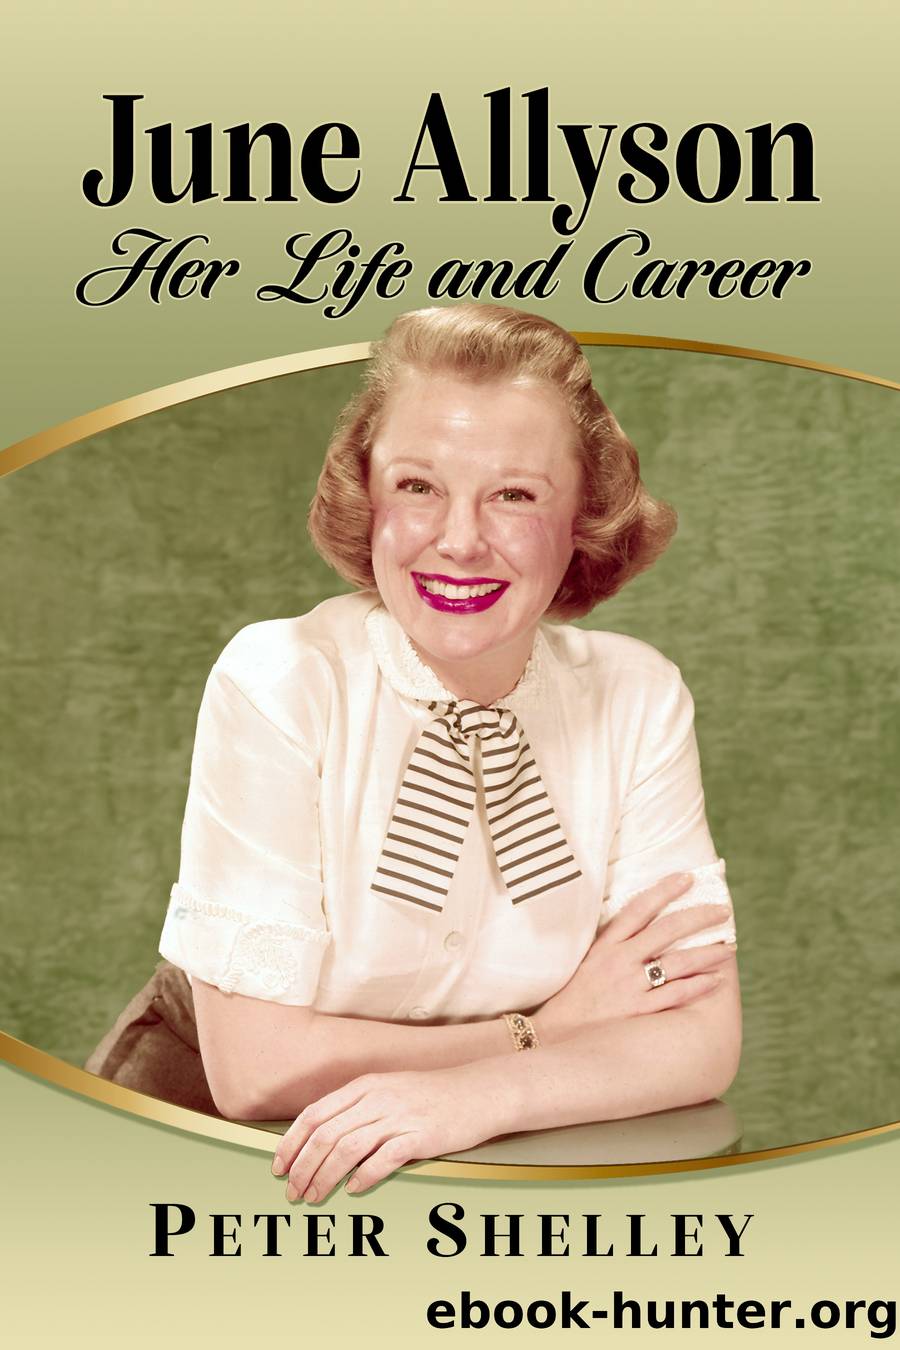 June Allyson: Her Life and Career by Peter Shelley